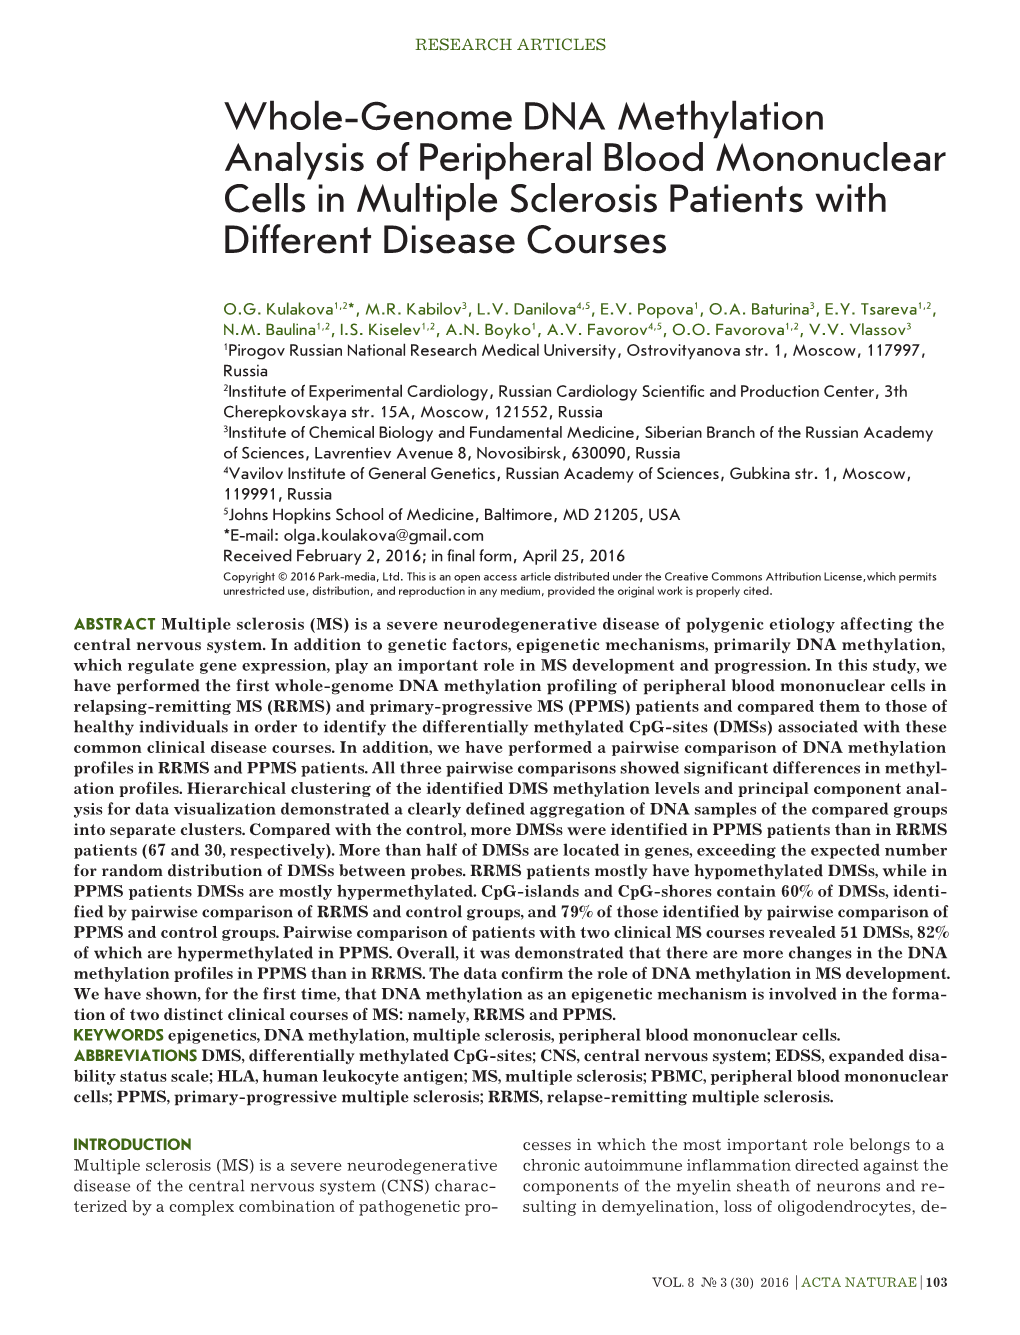 Whole-Genome DNA Methylation Analysis of Peripheral Blood Mononuclear Cells in Multiple Sclerosis Patients with Different Disease Courses